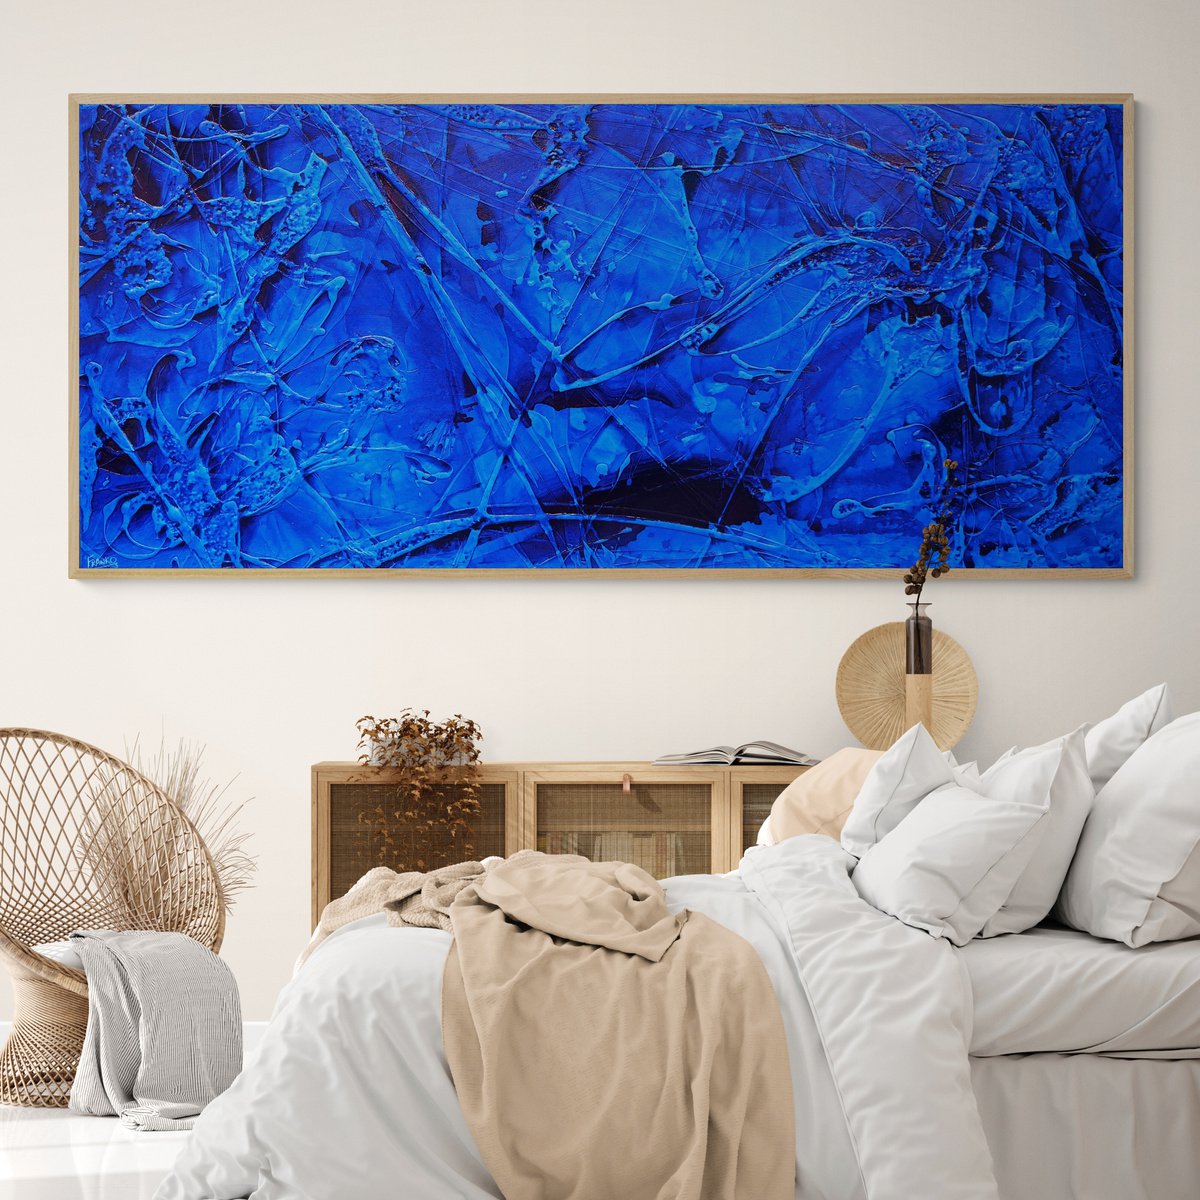 Inked Euphoria 270cm x 120cm Blue Textured Abstract Art by Franko